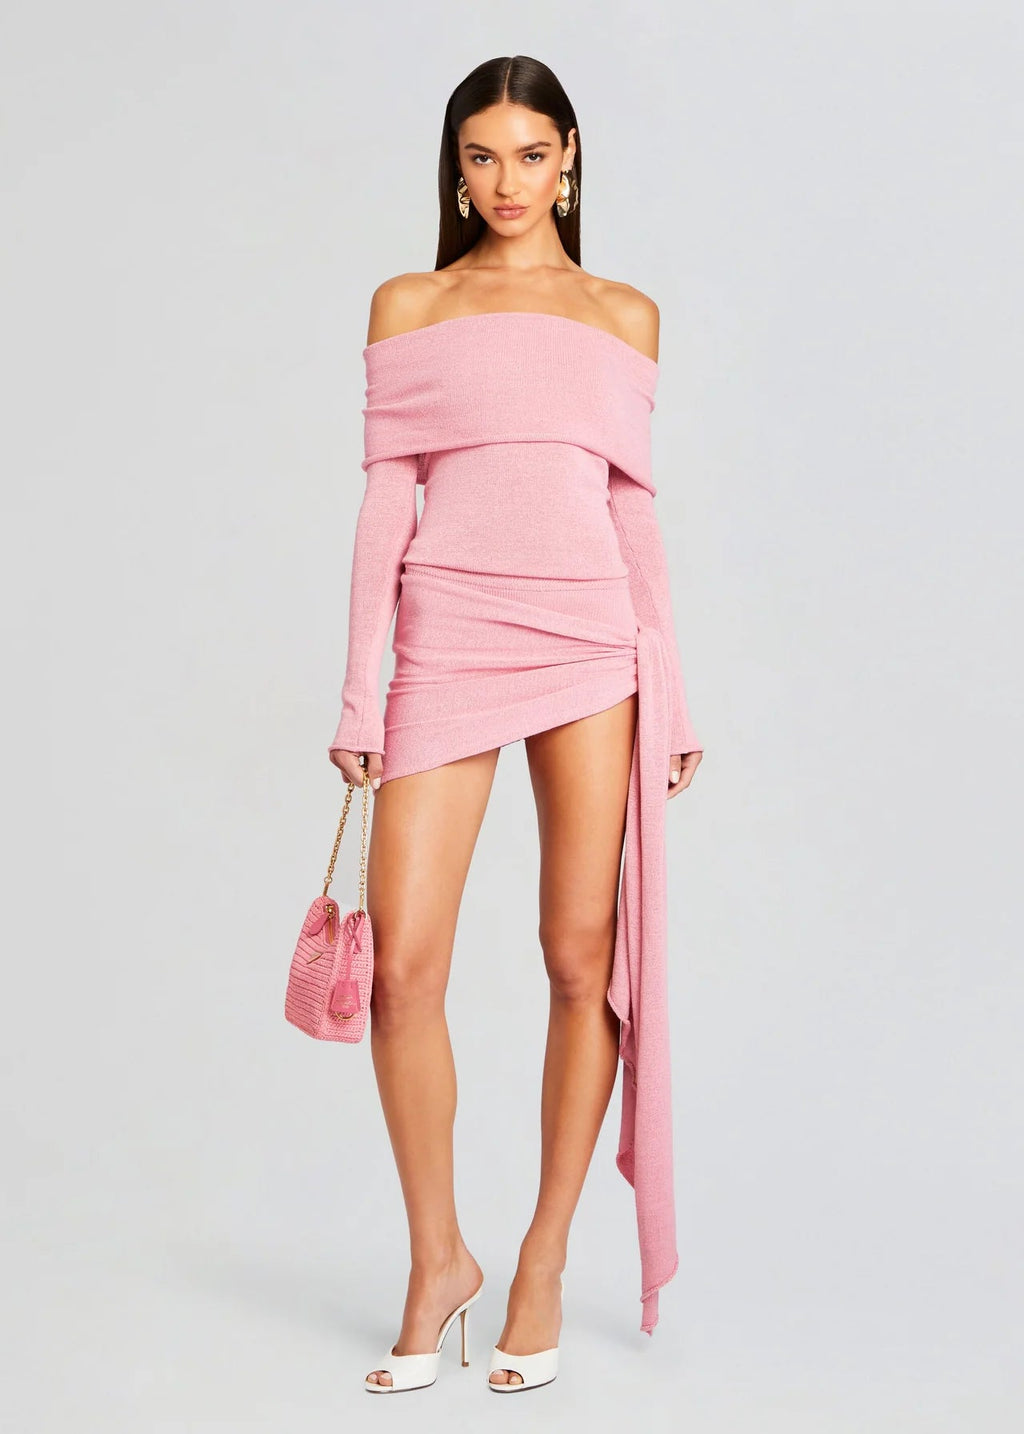 Fay Romper in Mauve - Ché by Chelsey